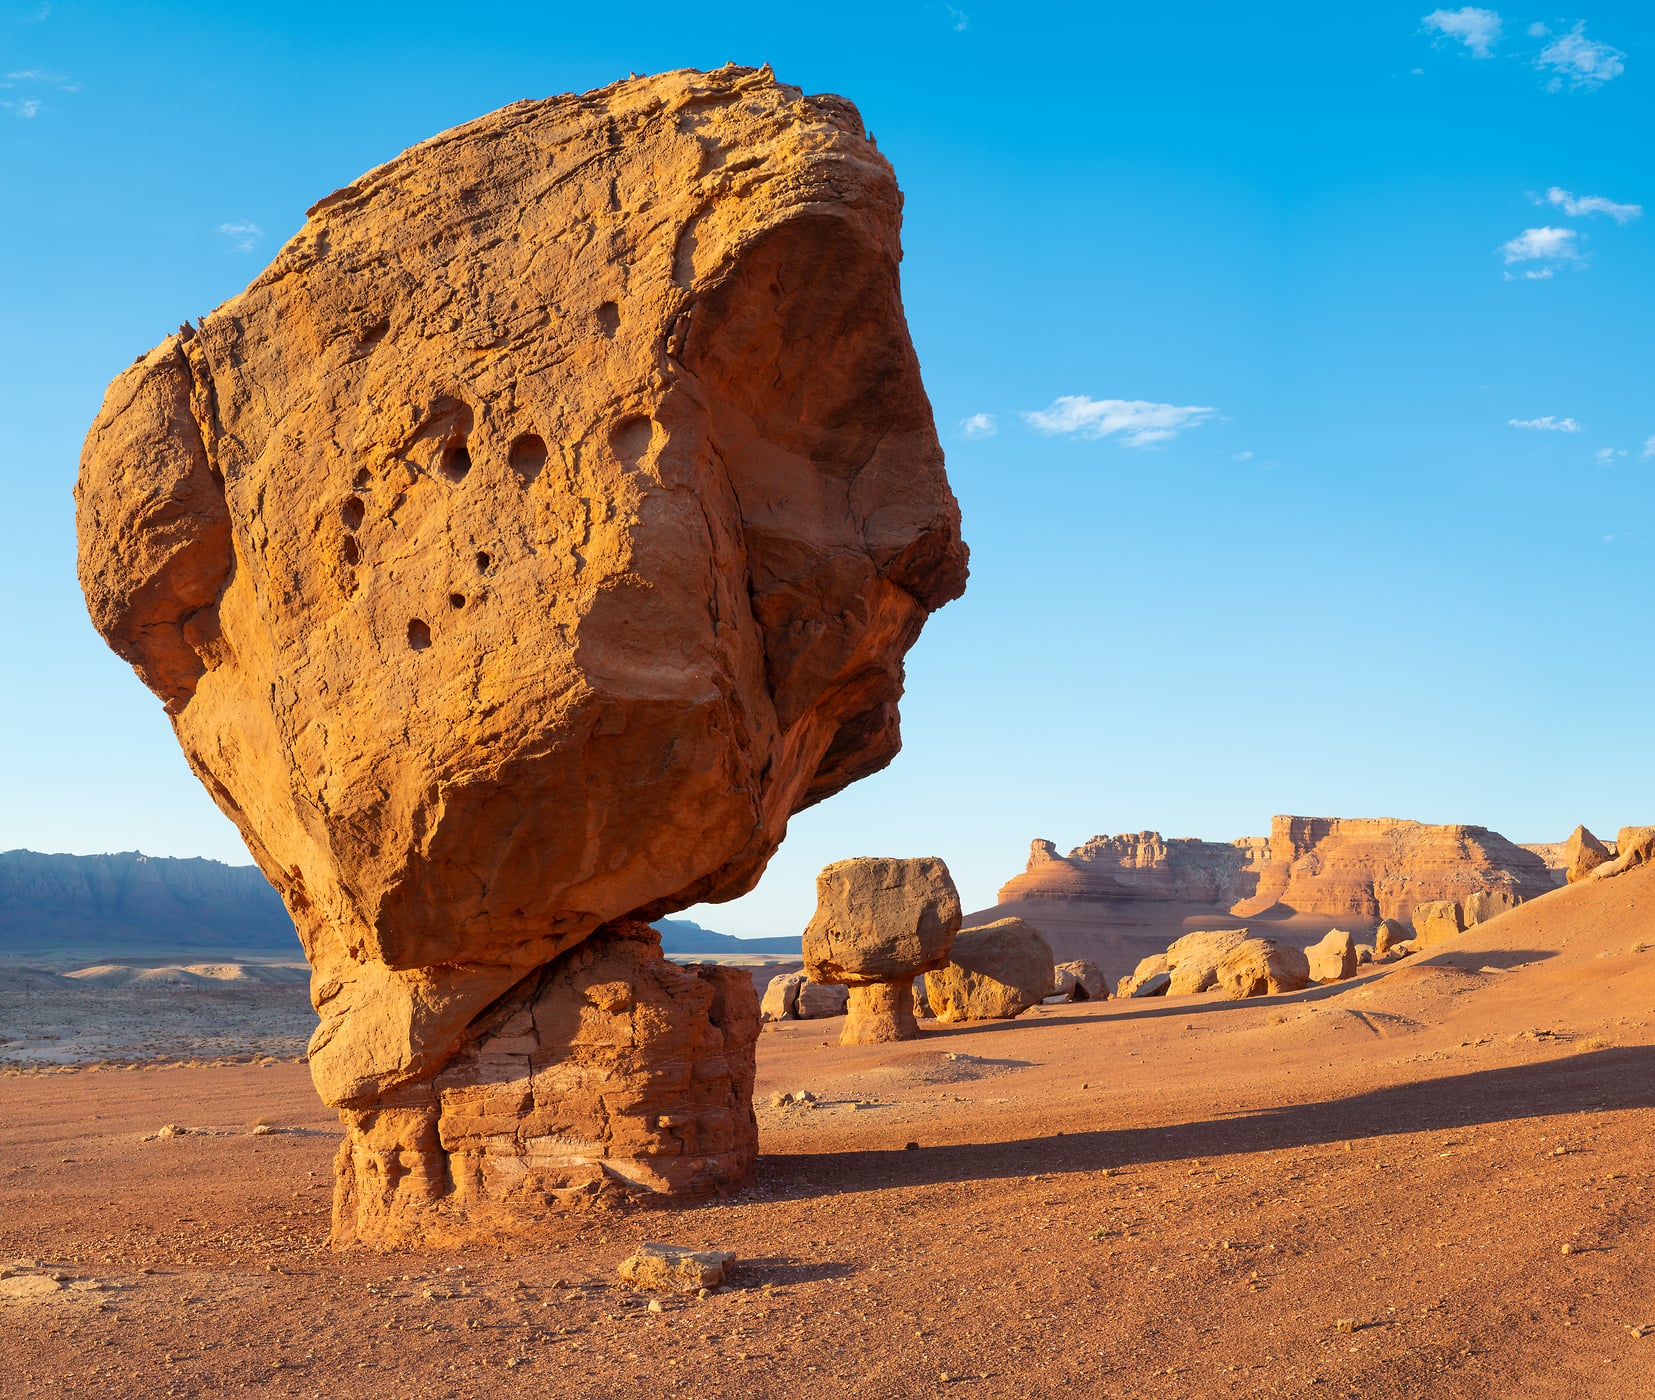 274 megapixels! A very high resolution, large-format VAST photo print of a boulder rock balanced on another rock in a desert; wall art photograph created by Greg Probst.